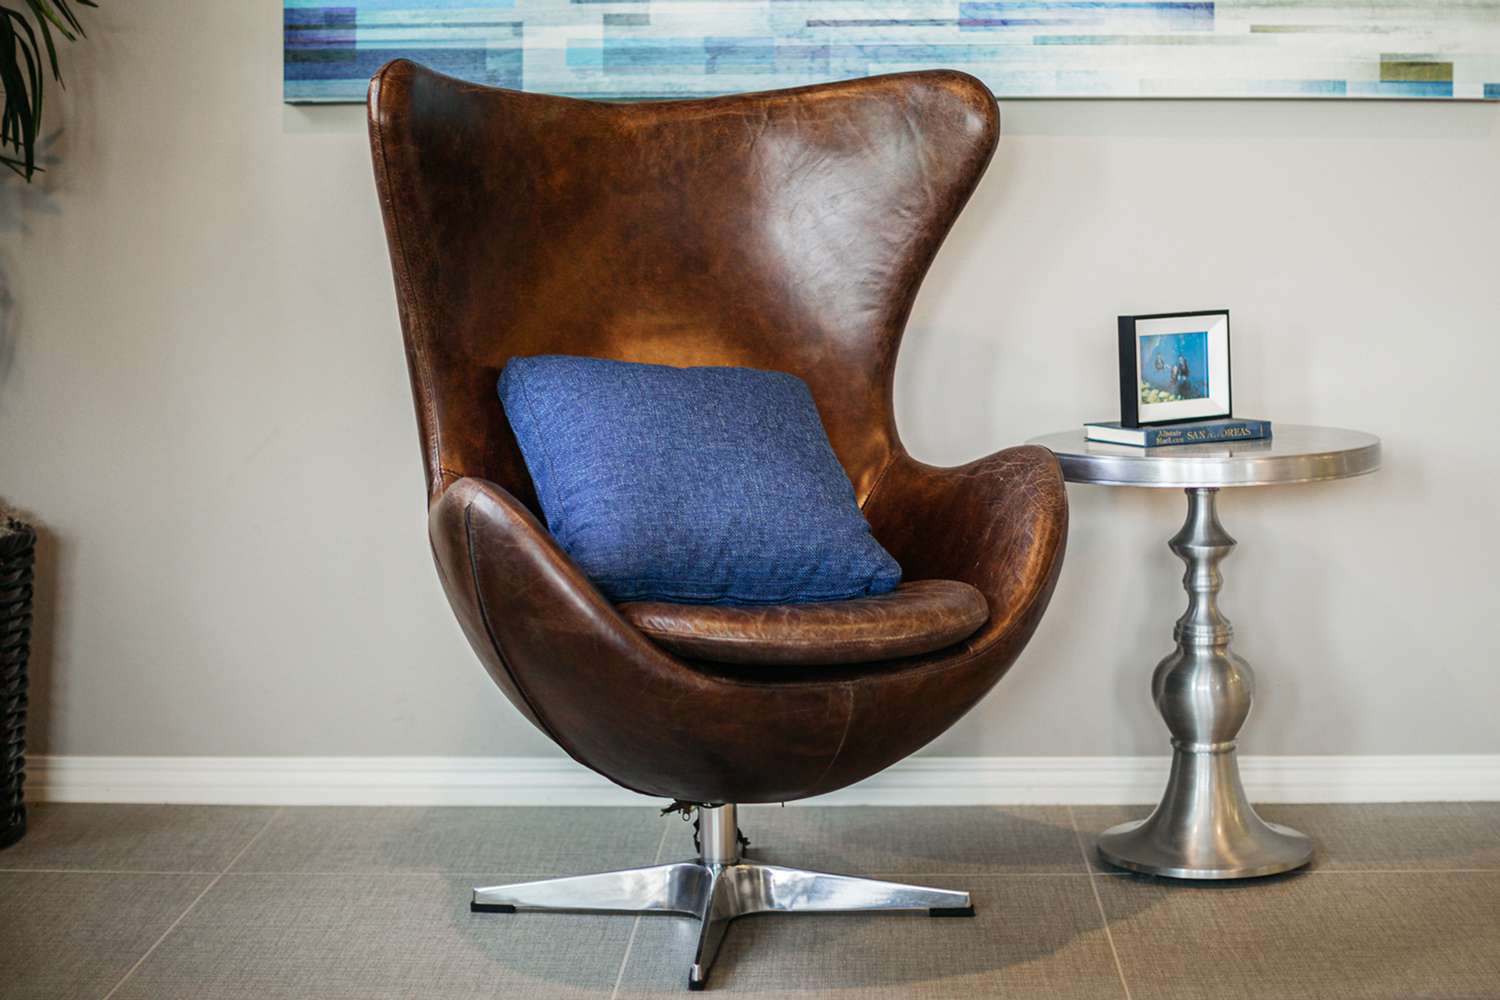 Brown leather Arne Jacobsen egg chair with blue throw pillow